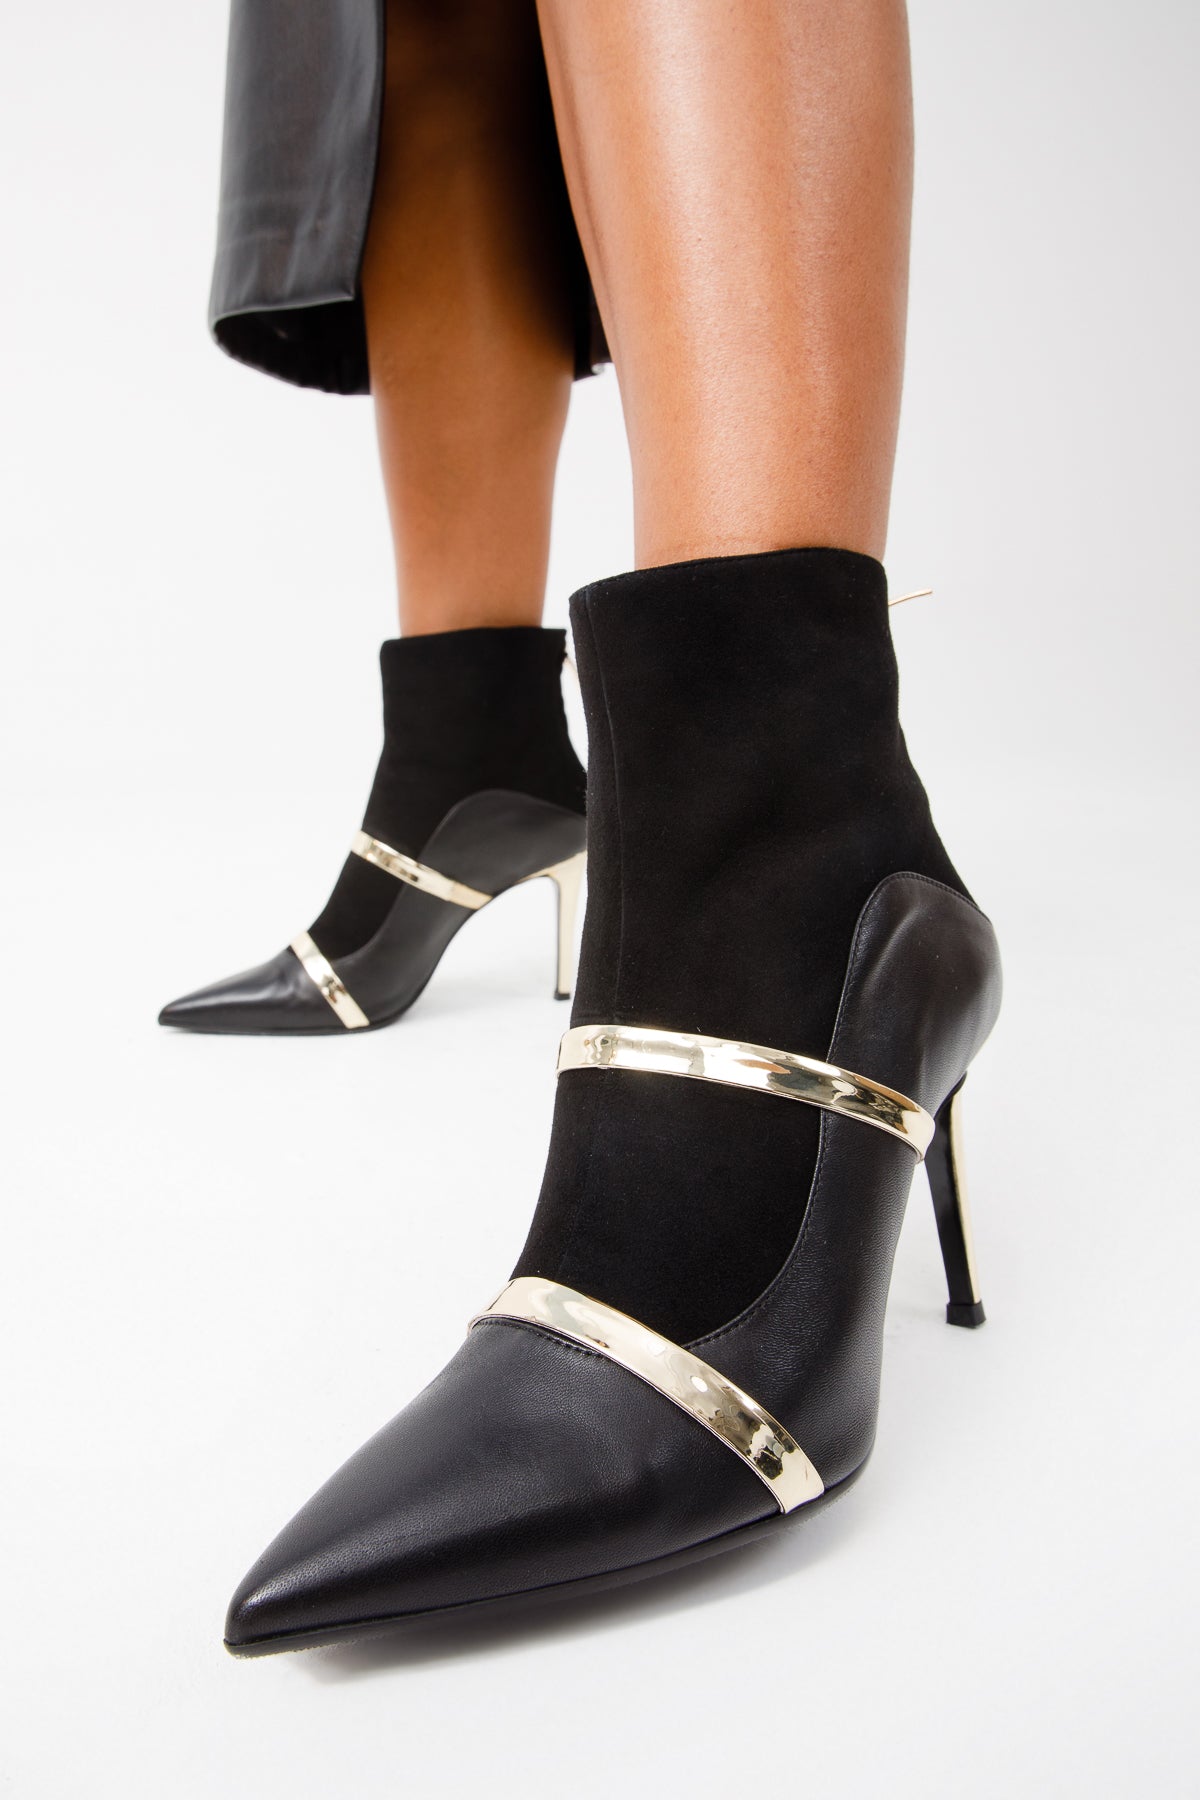 The Manila Black Leather Ankle Women Boot